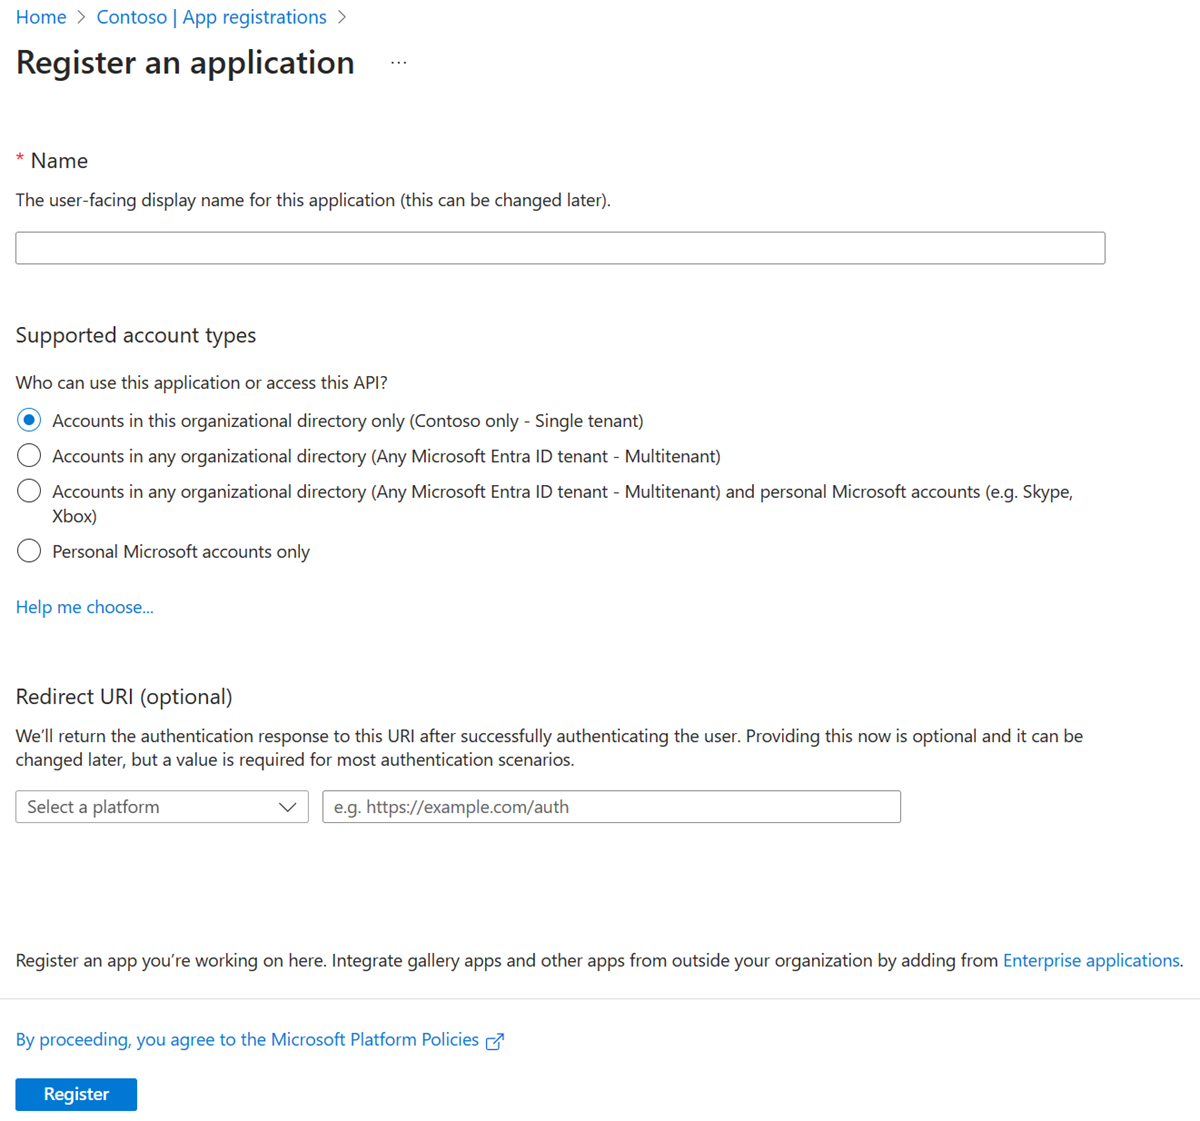 Screenshot of the Azure portal in a web browser, showing the Register an application pane.